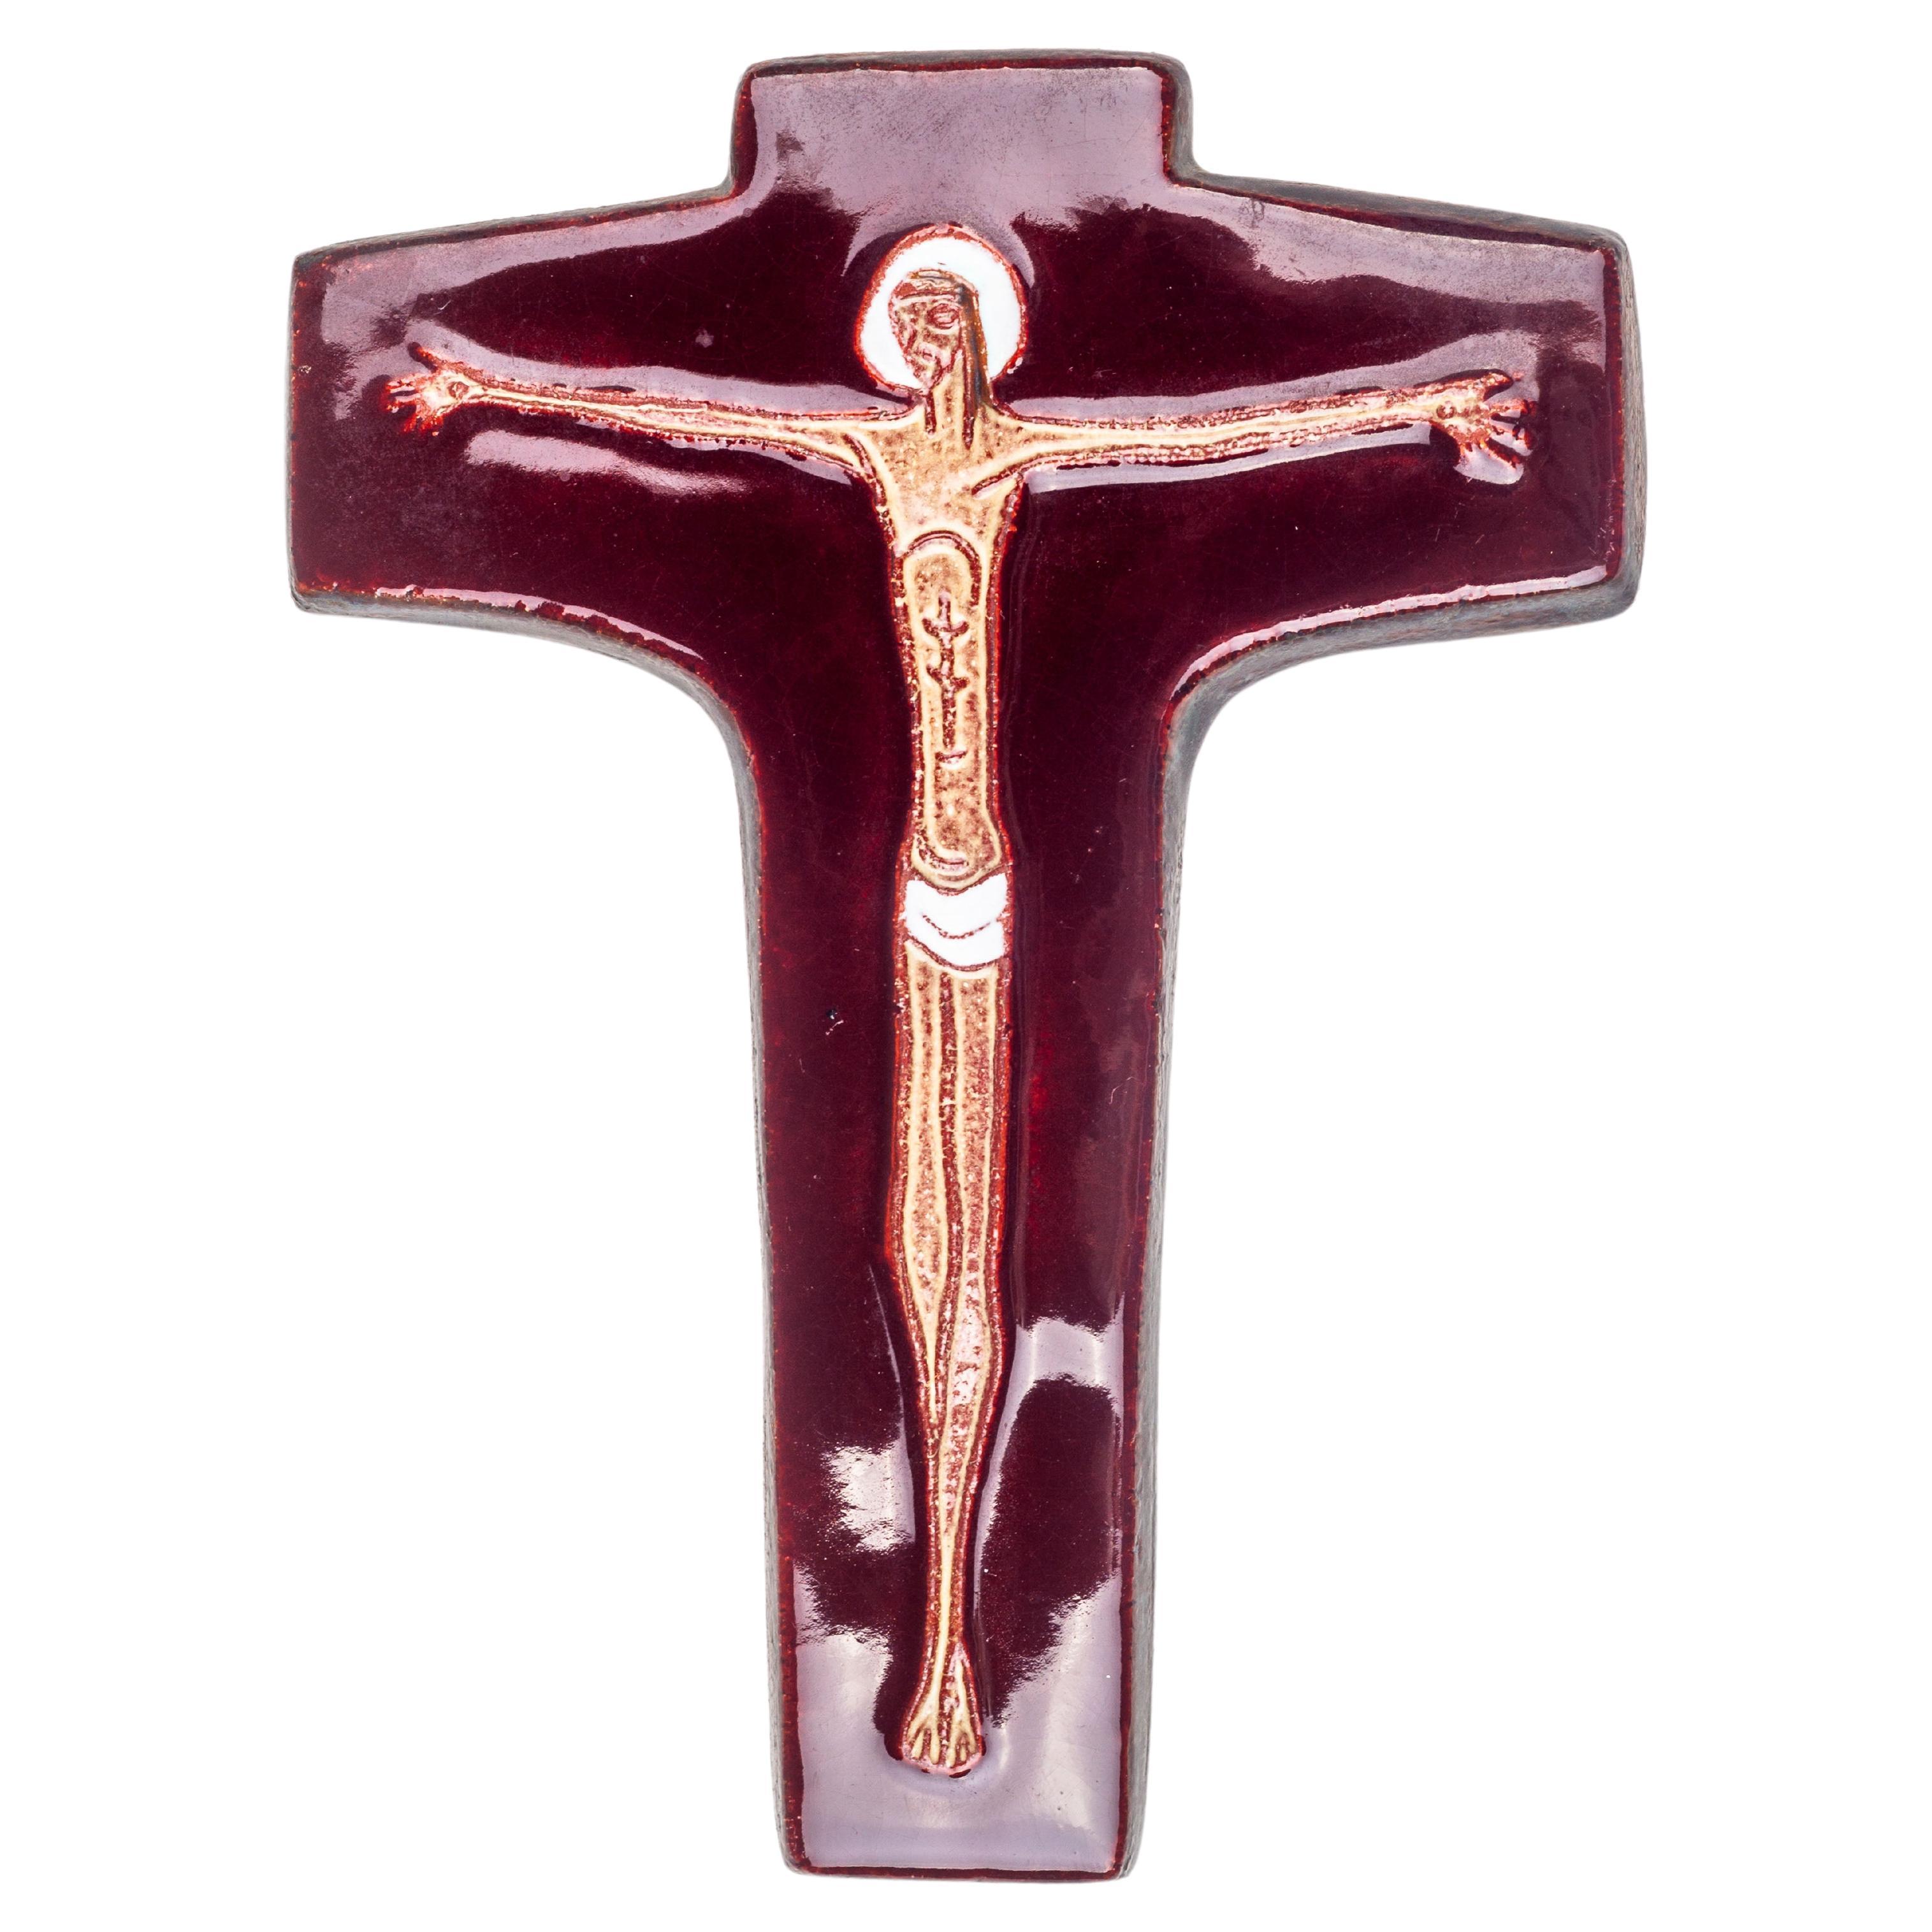 Modernist red crucifix with Christ figure, wall decoration handmade For Sale